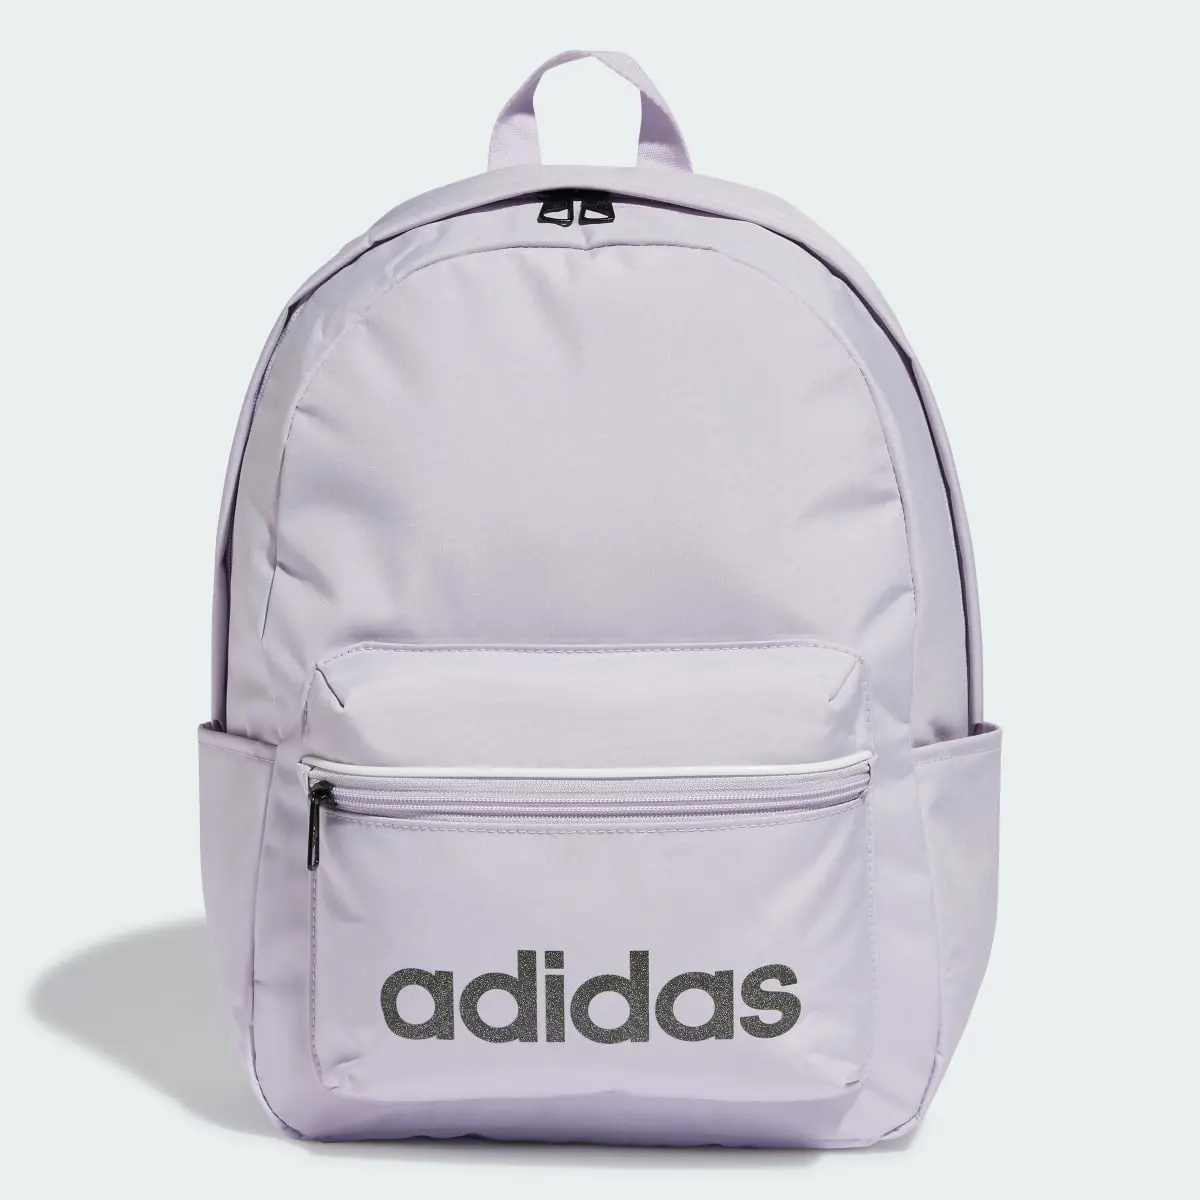 Adidas Linear Essentials Backpack. 1